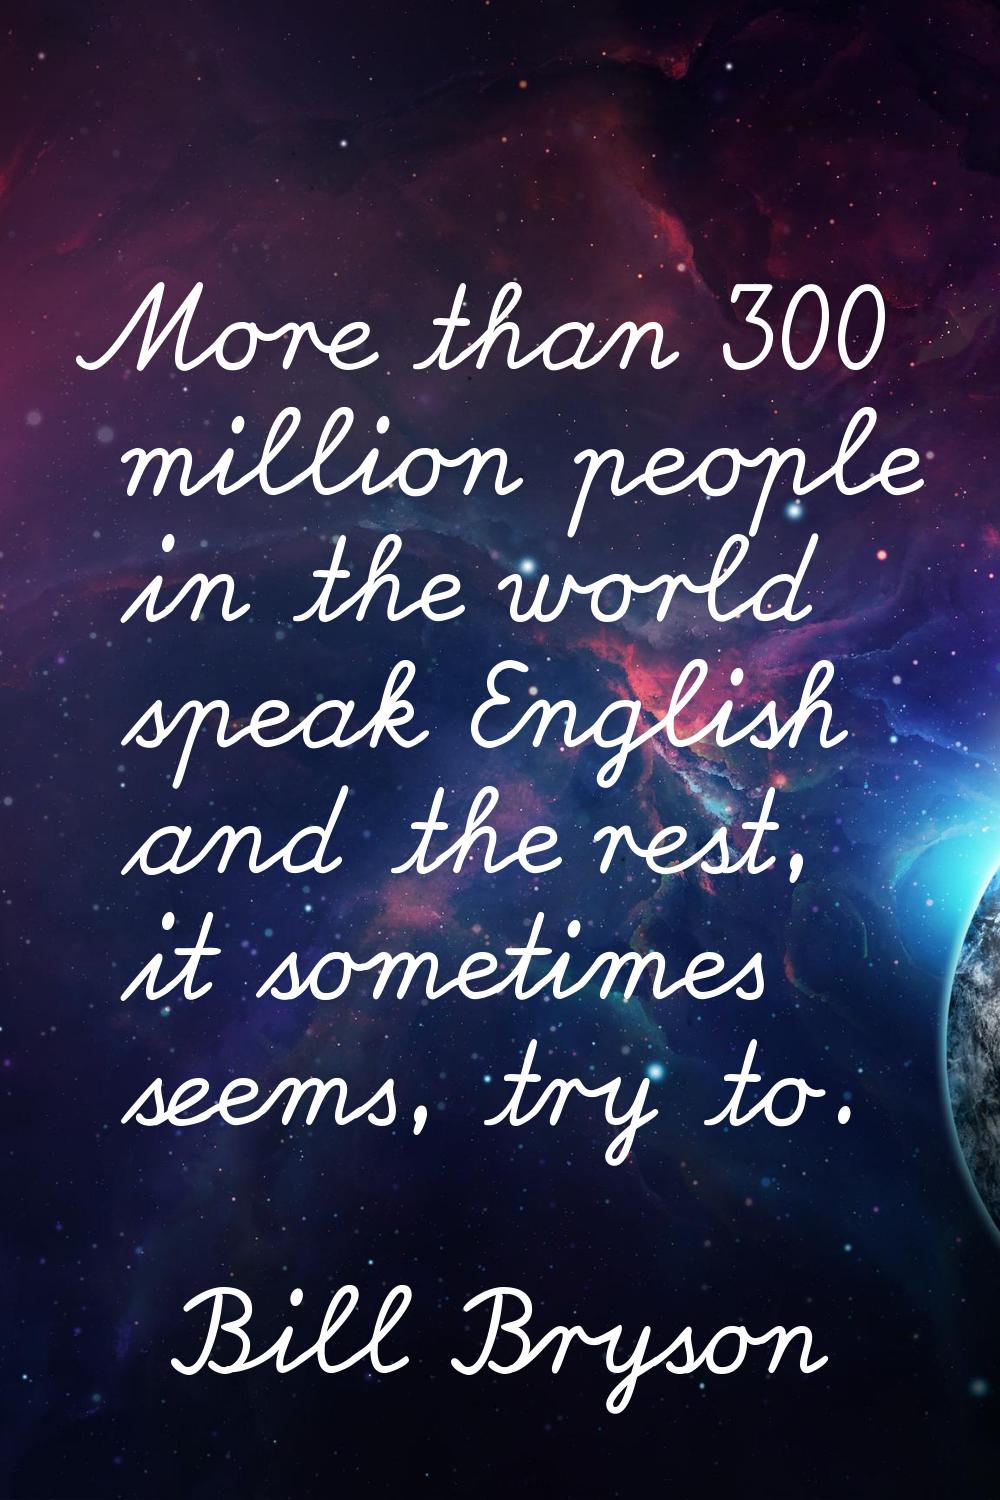 More than 300 million people in the world speak English and the rest, it sometimes seems, try to.